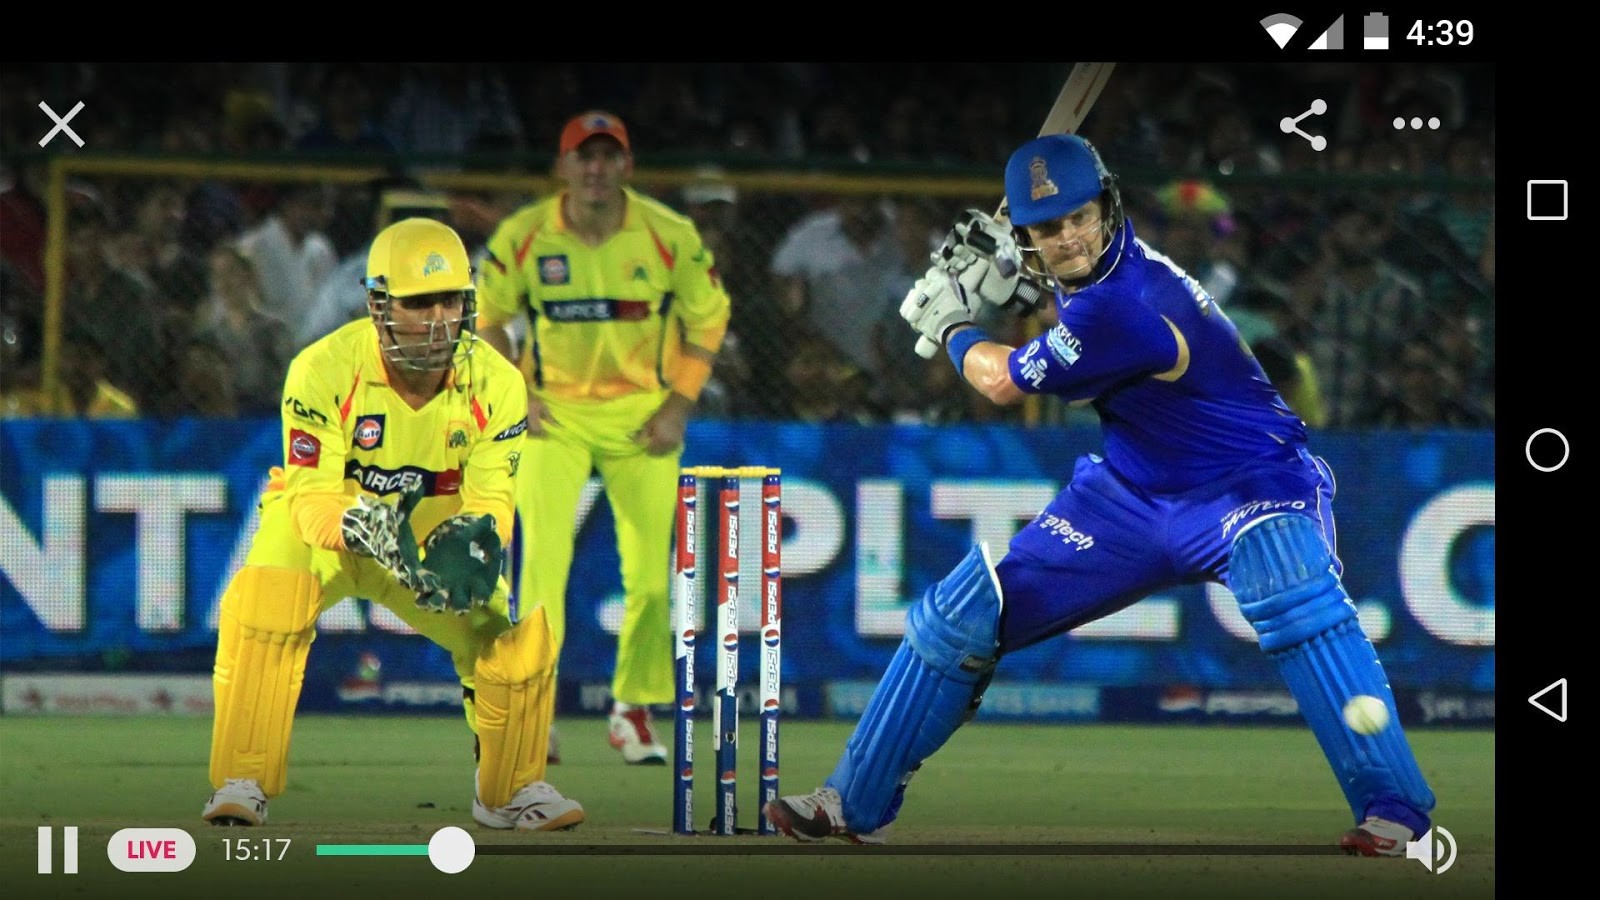 Hotstar Android App: Watch Live Cricket Match Online - Show Box